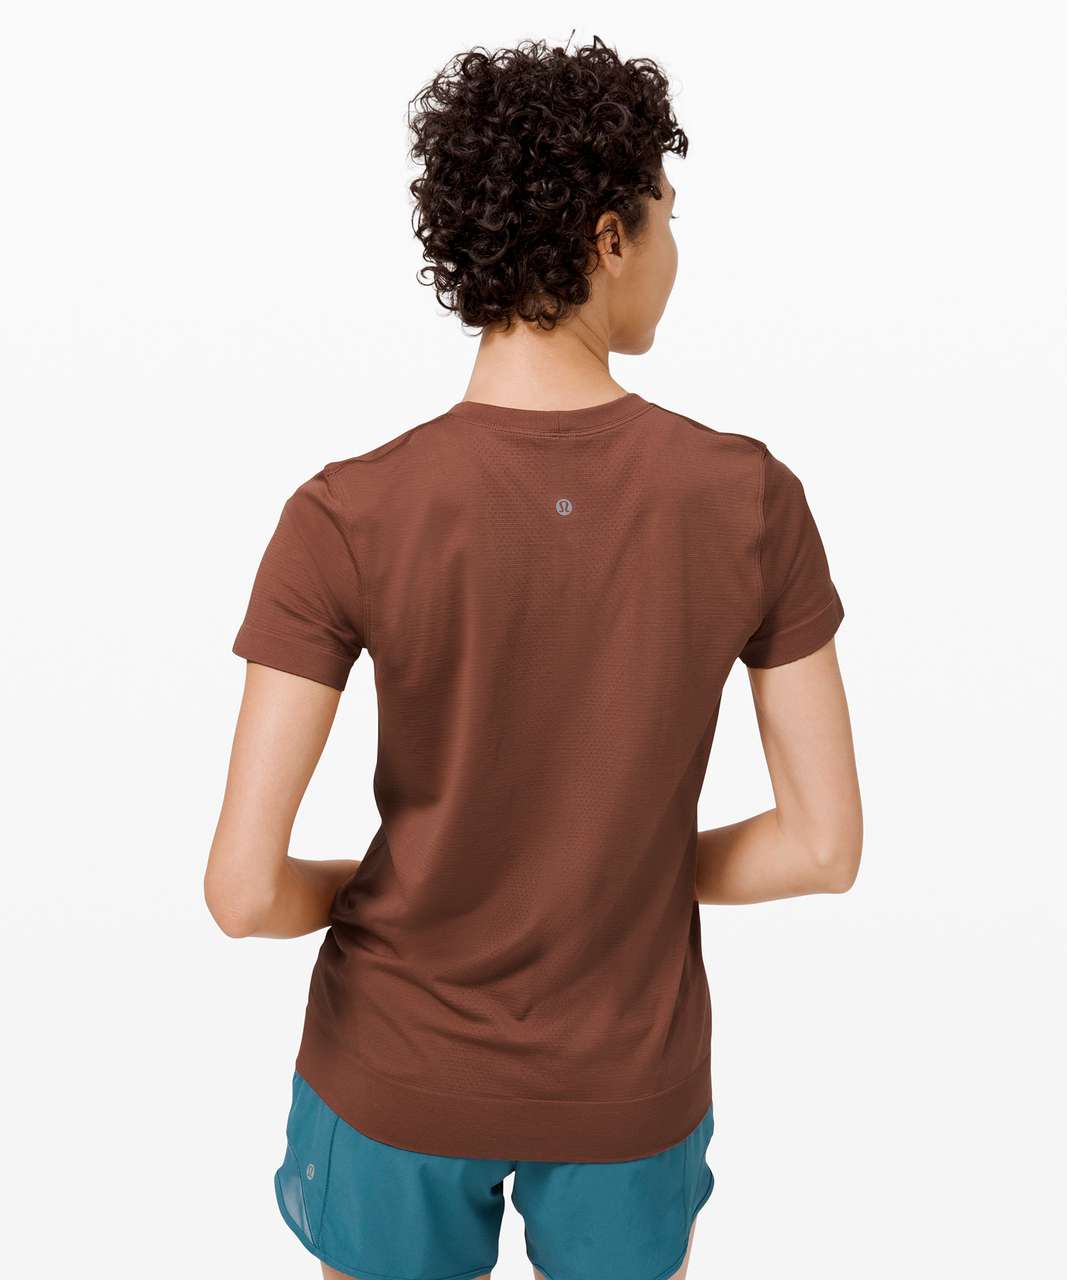 Lululemon Swiftly Breathe Short Sleeve - Ancient Copper / Ancient Copper